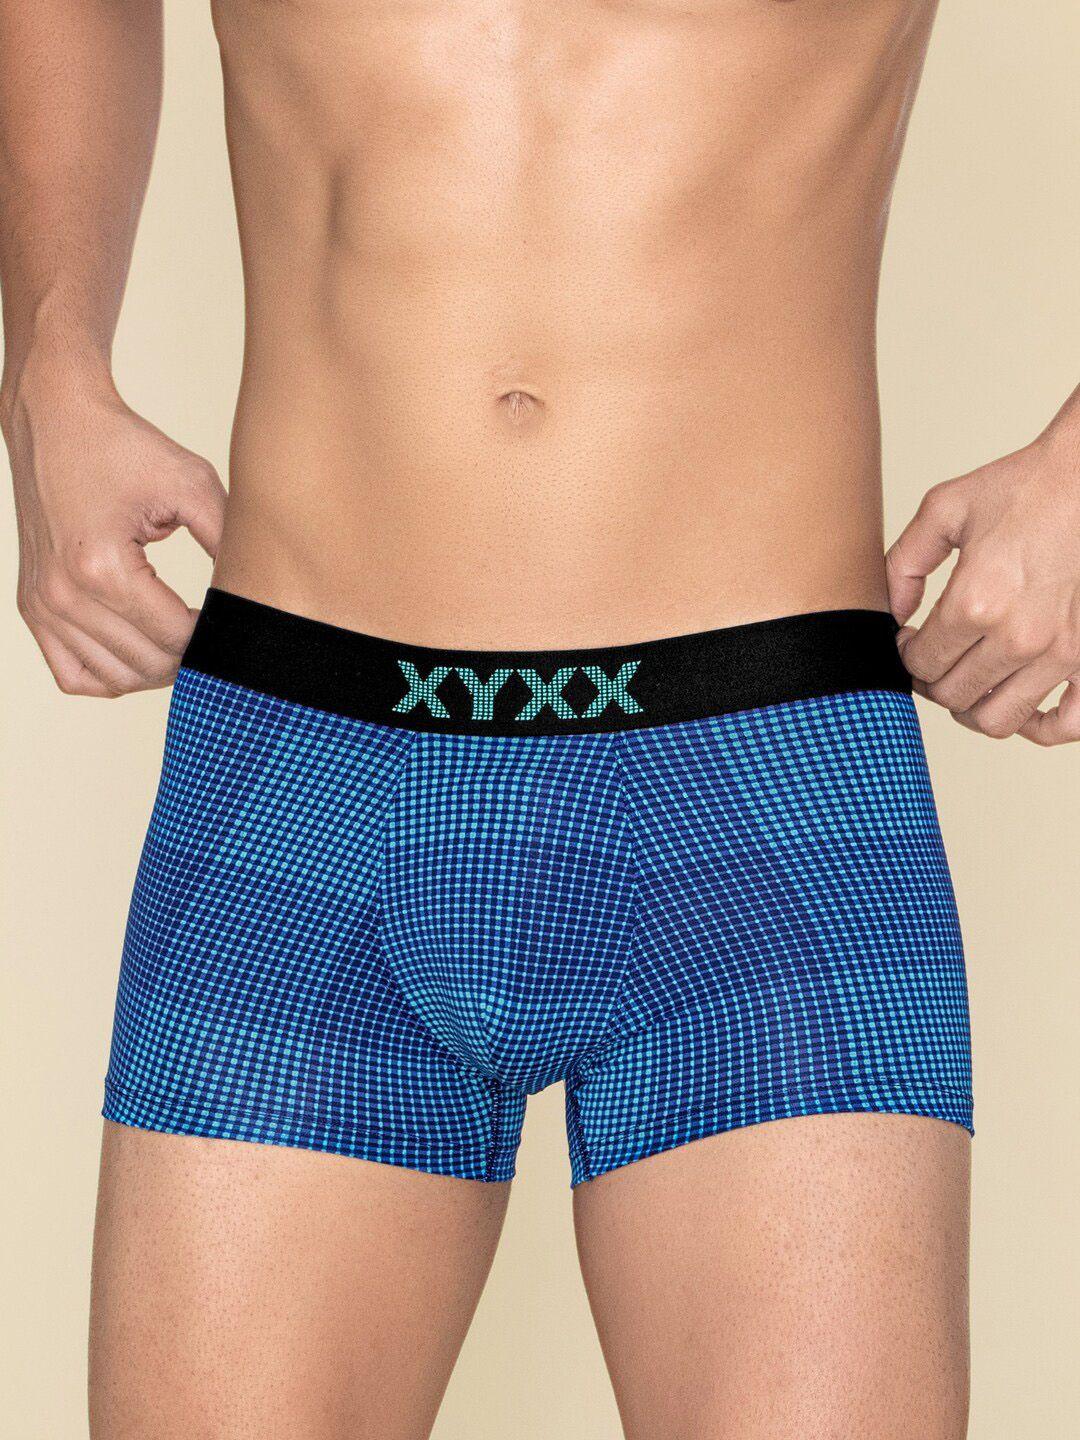 xyxx checked mid-rise trunks xytrnk186